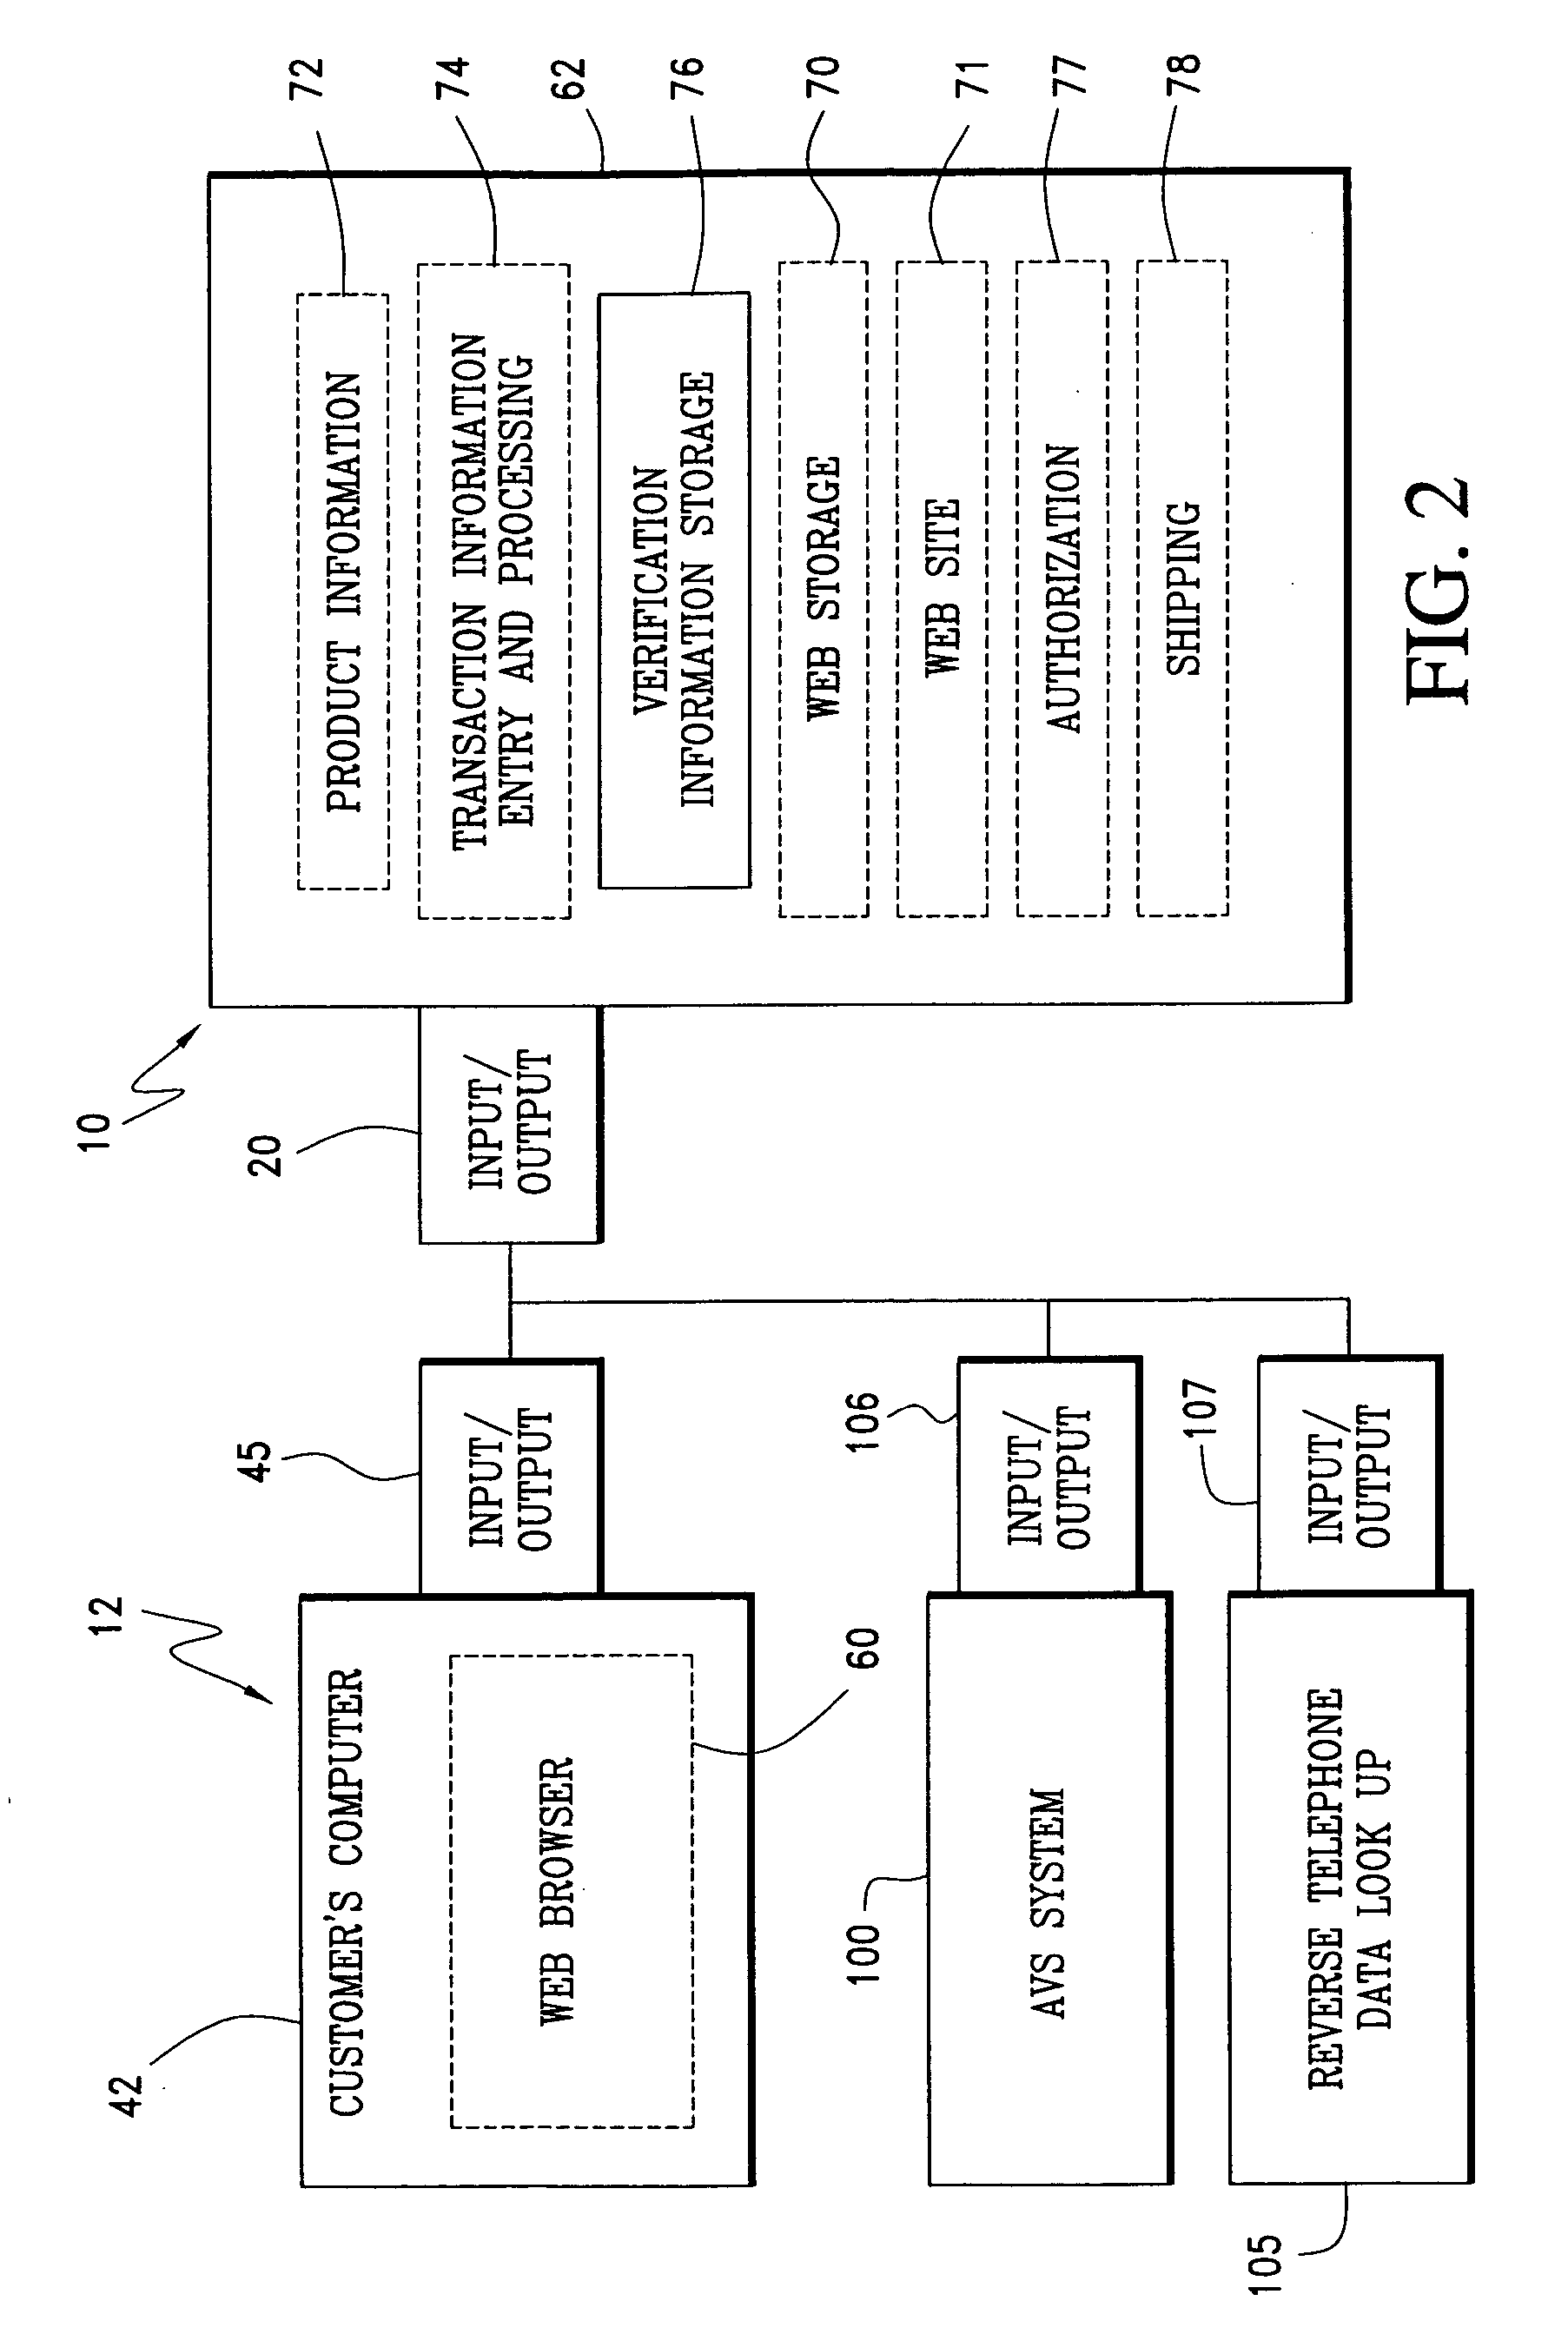 Method and apparatus for verifying a financial instrument